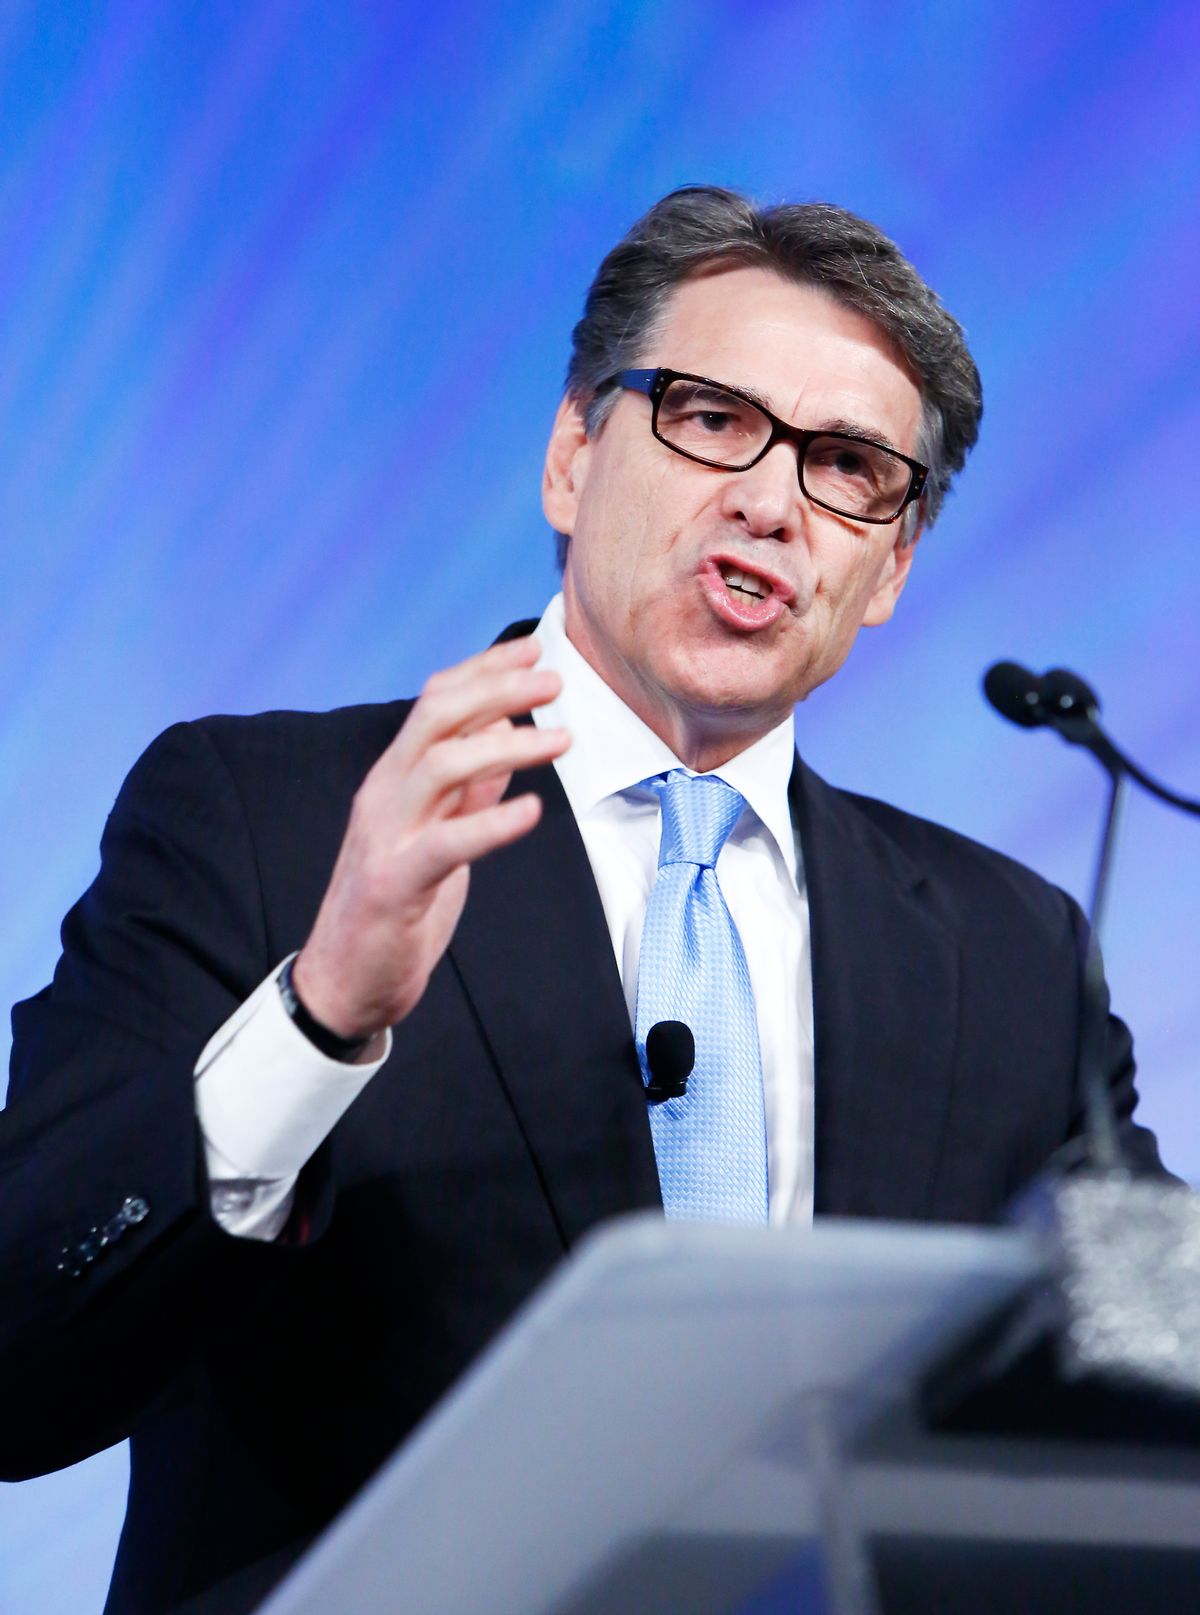 Former Texas Governor Rick Perry speaks at the Southern Republican Leadership Conference in Oklahoma City, on Thursday, May 21, 2015. (AP Photo/Alonzo Adams) (AP)